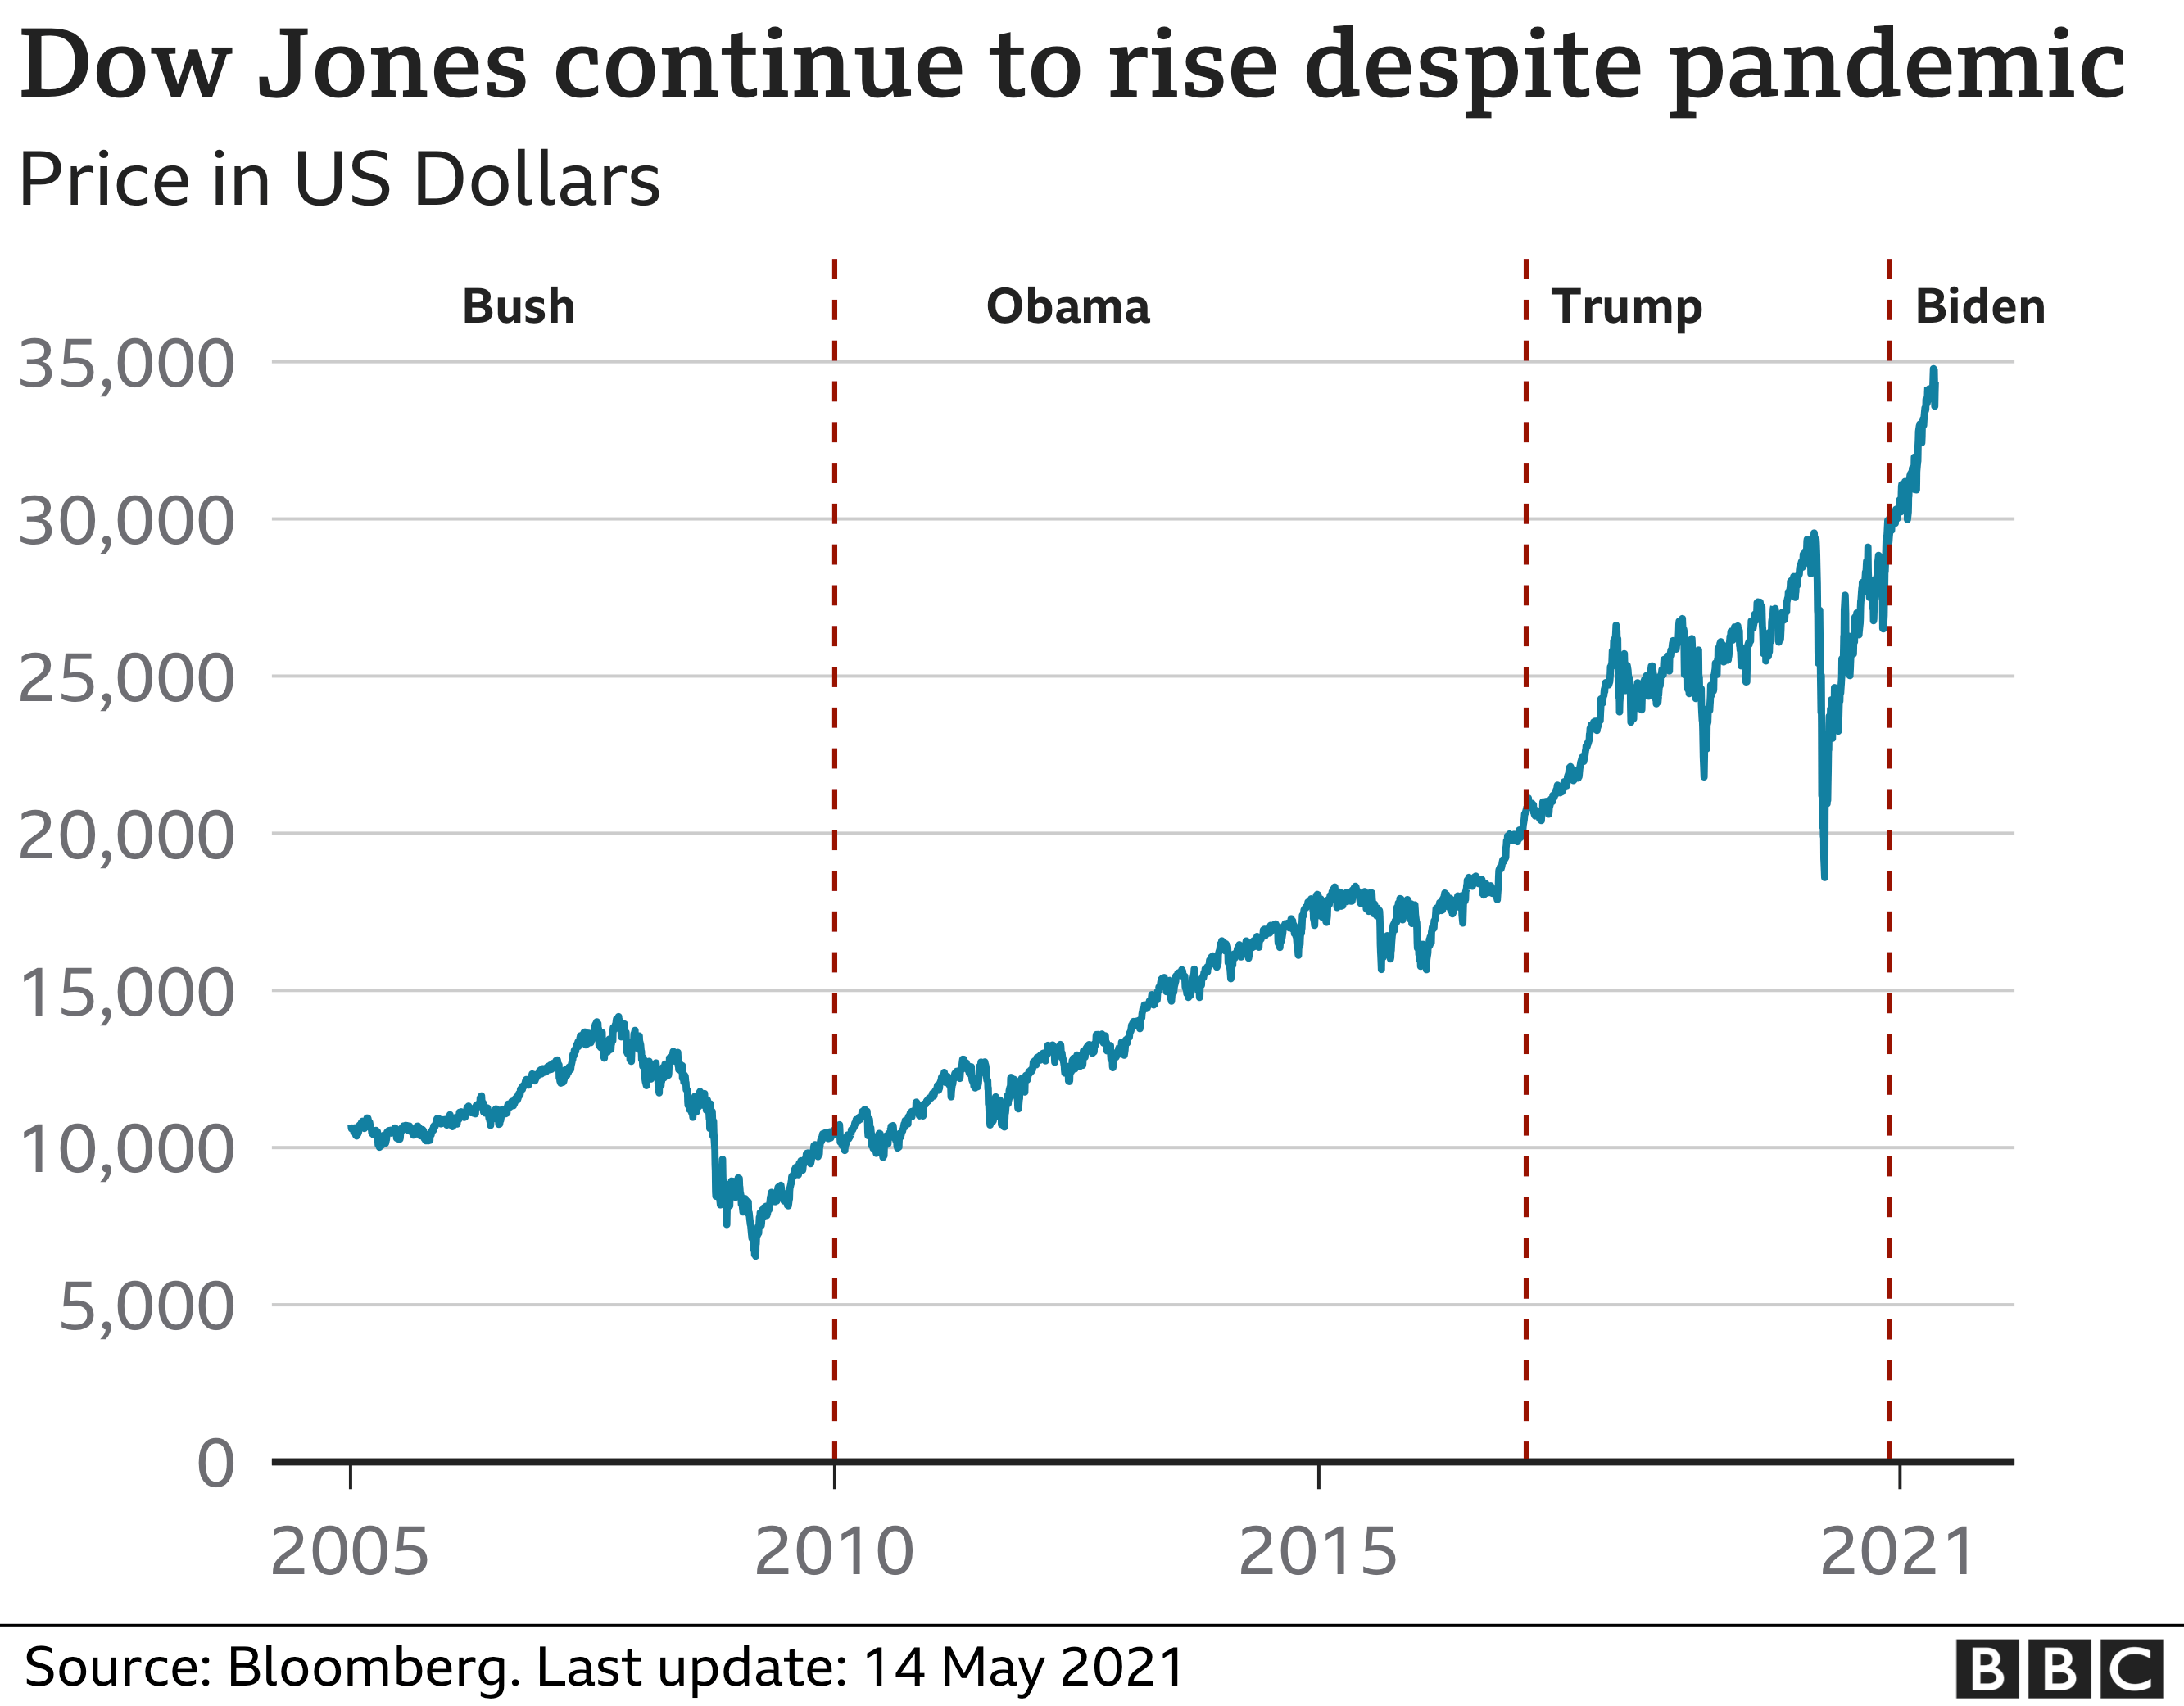 Dow Jones continues to rise despite pandemic